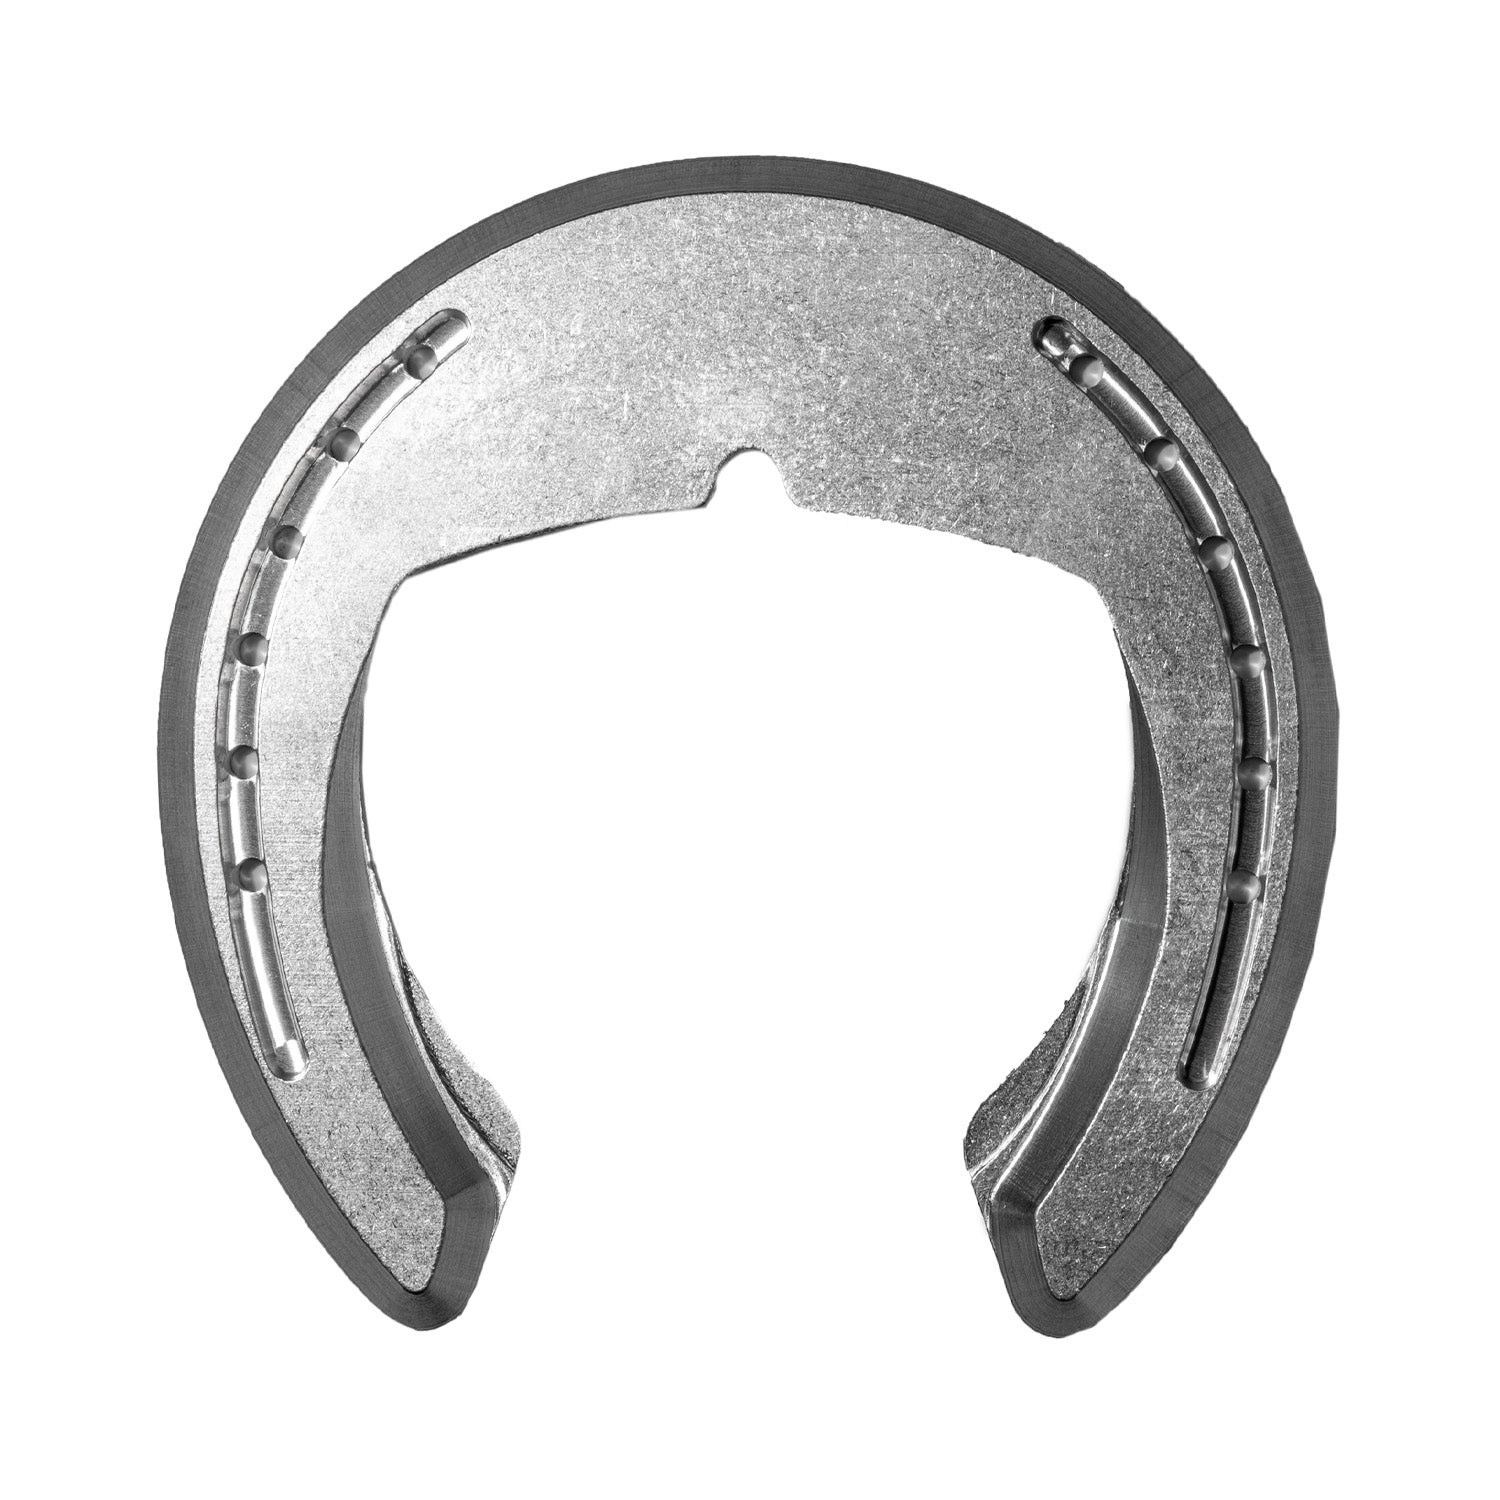 Horseshoes – Grand Circuit Products